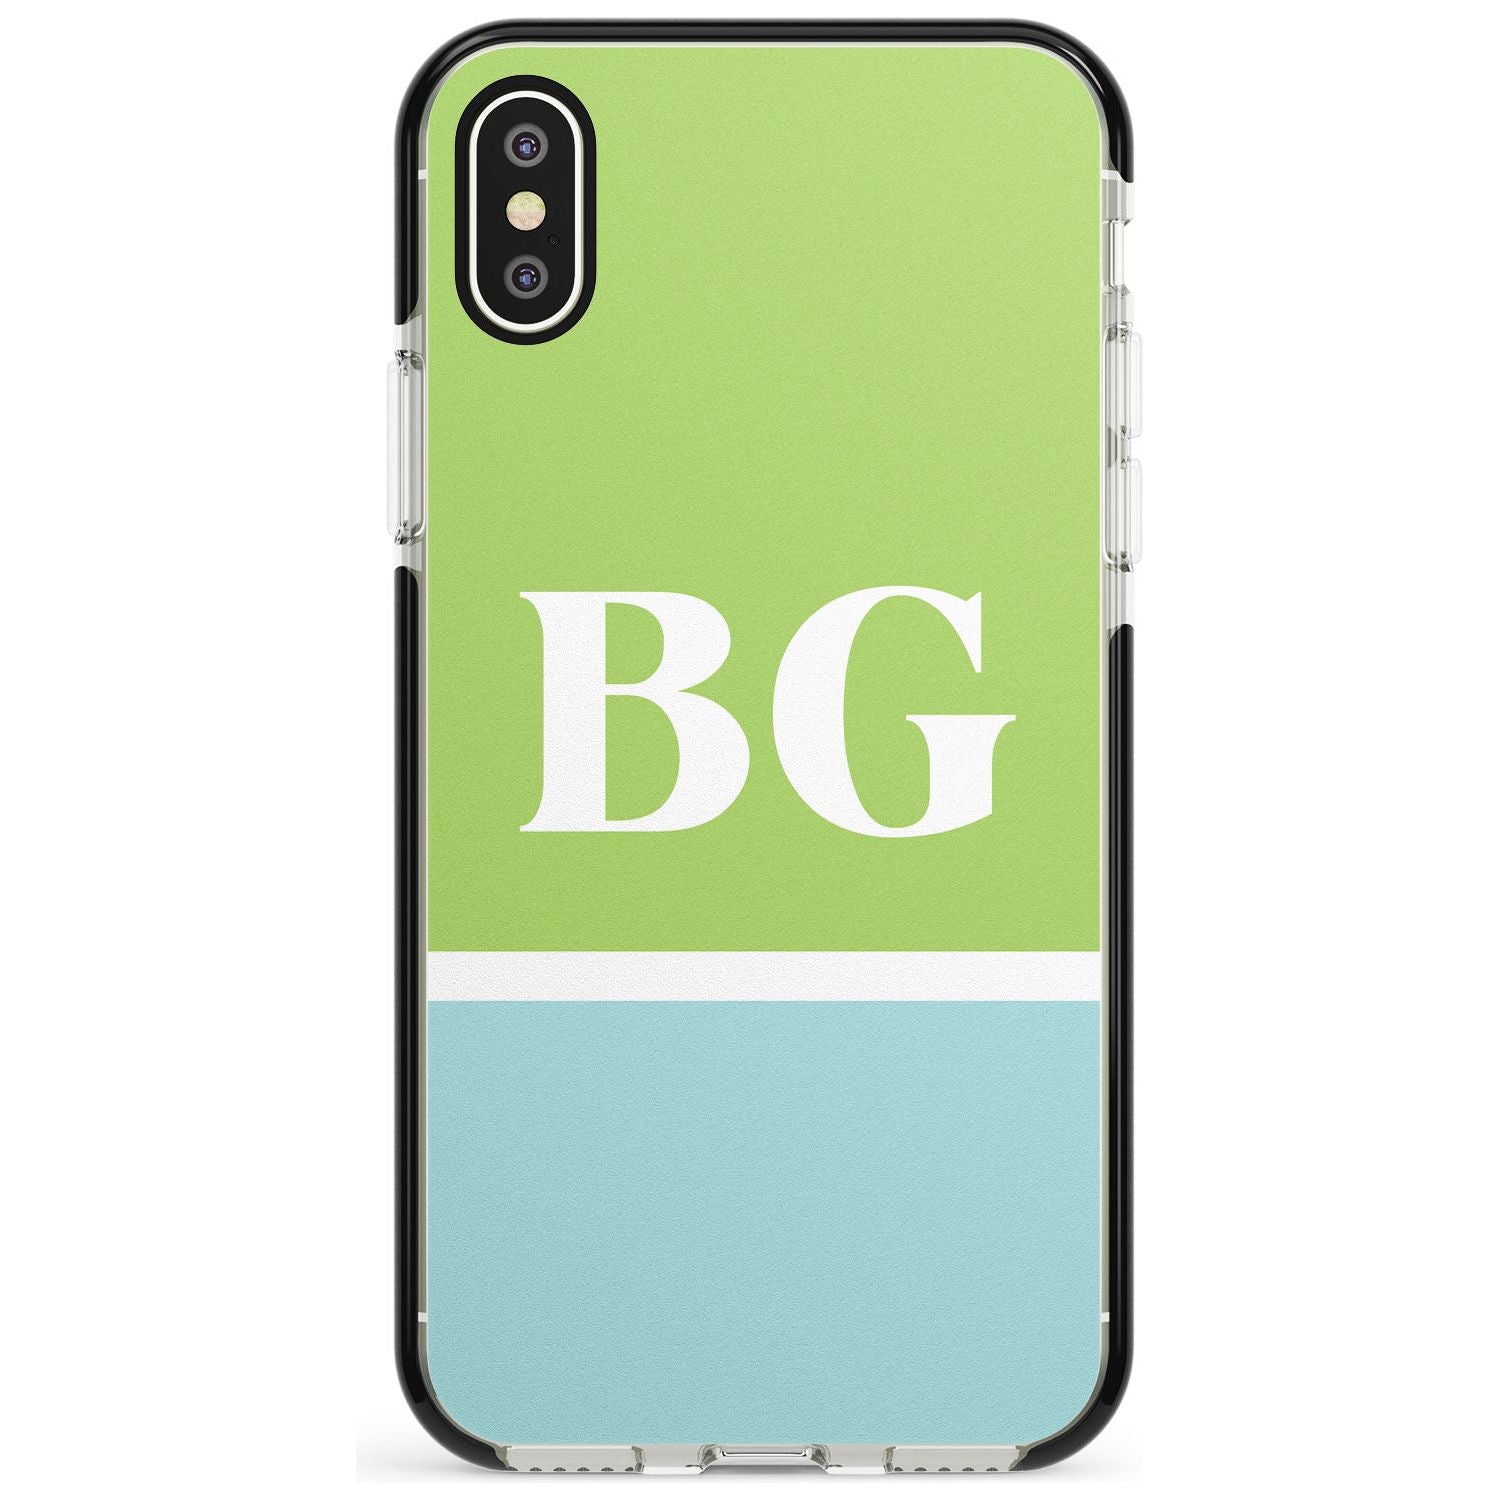 Colourblock: Green & Turquoise Black Impact Phone Case for iPhone X XS Max XR